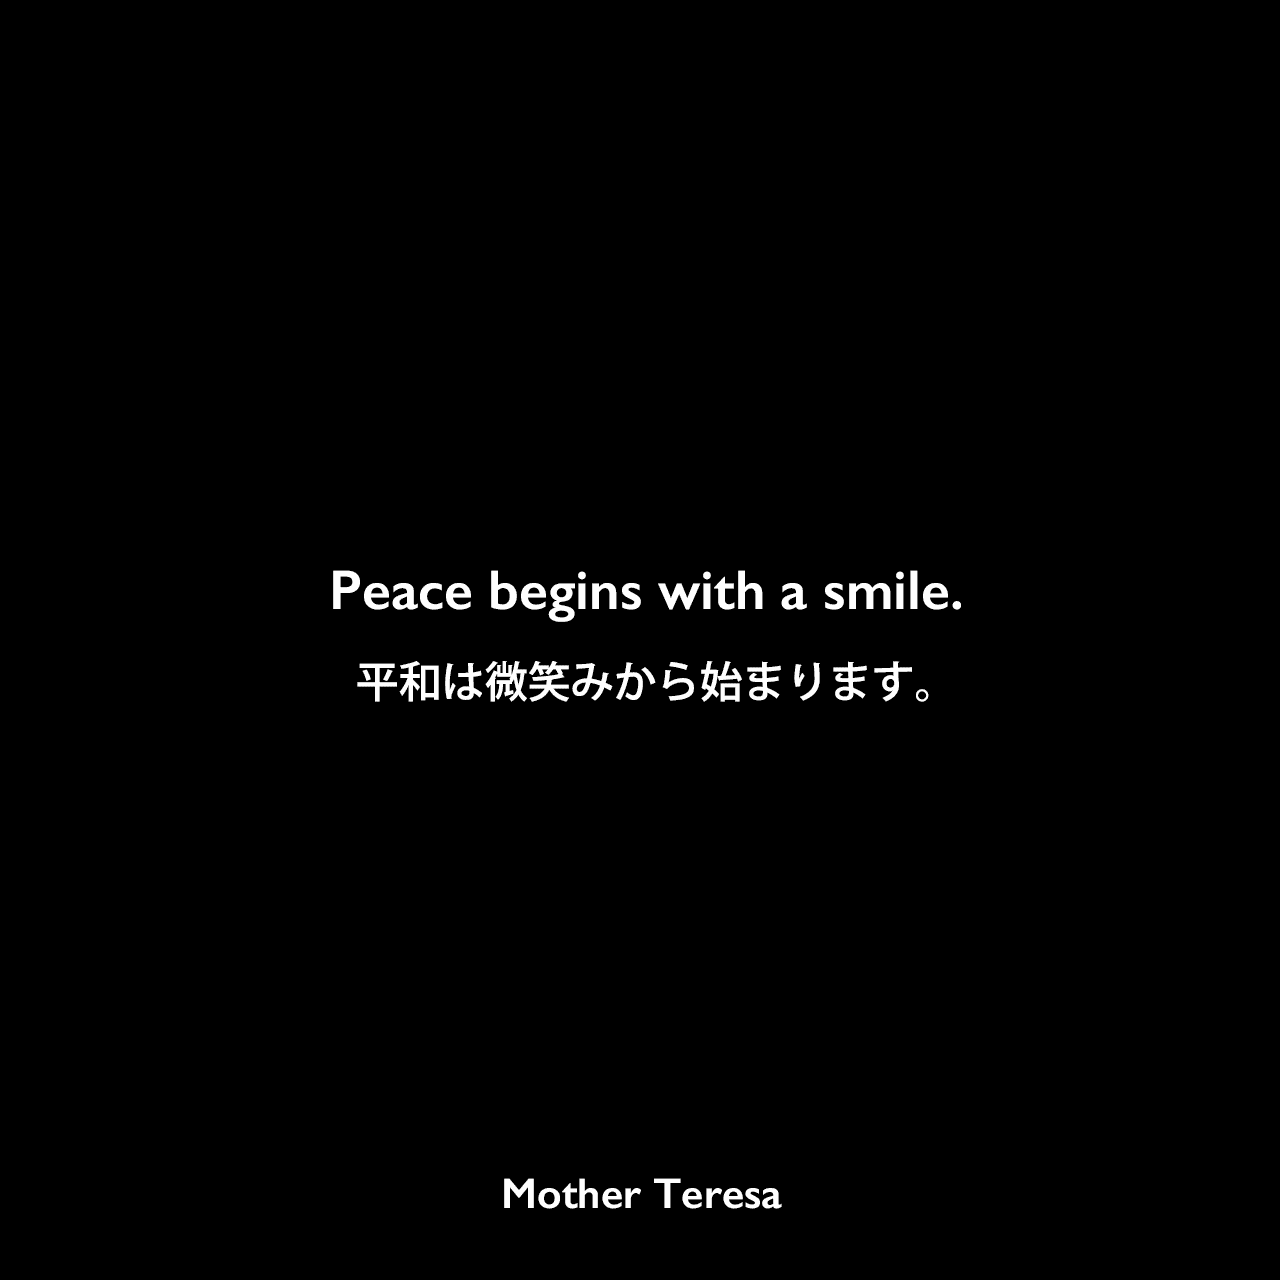 Peace begins with a smile.平和は微笑みから始まります。Mother Teresa